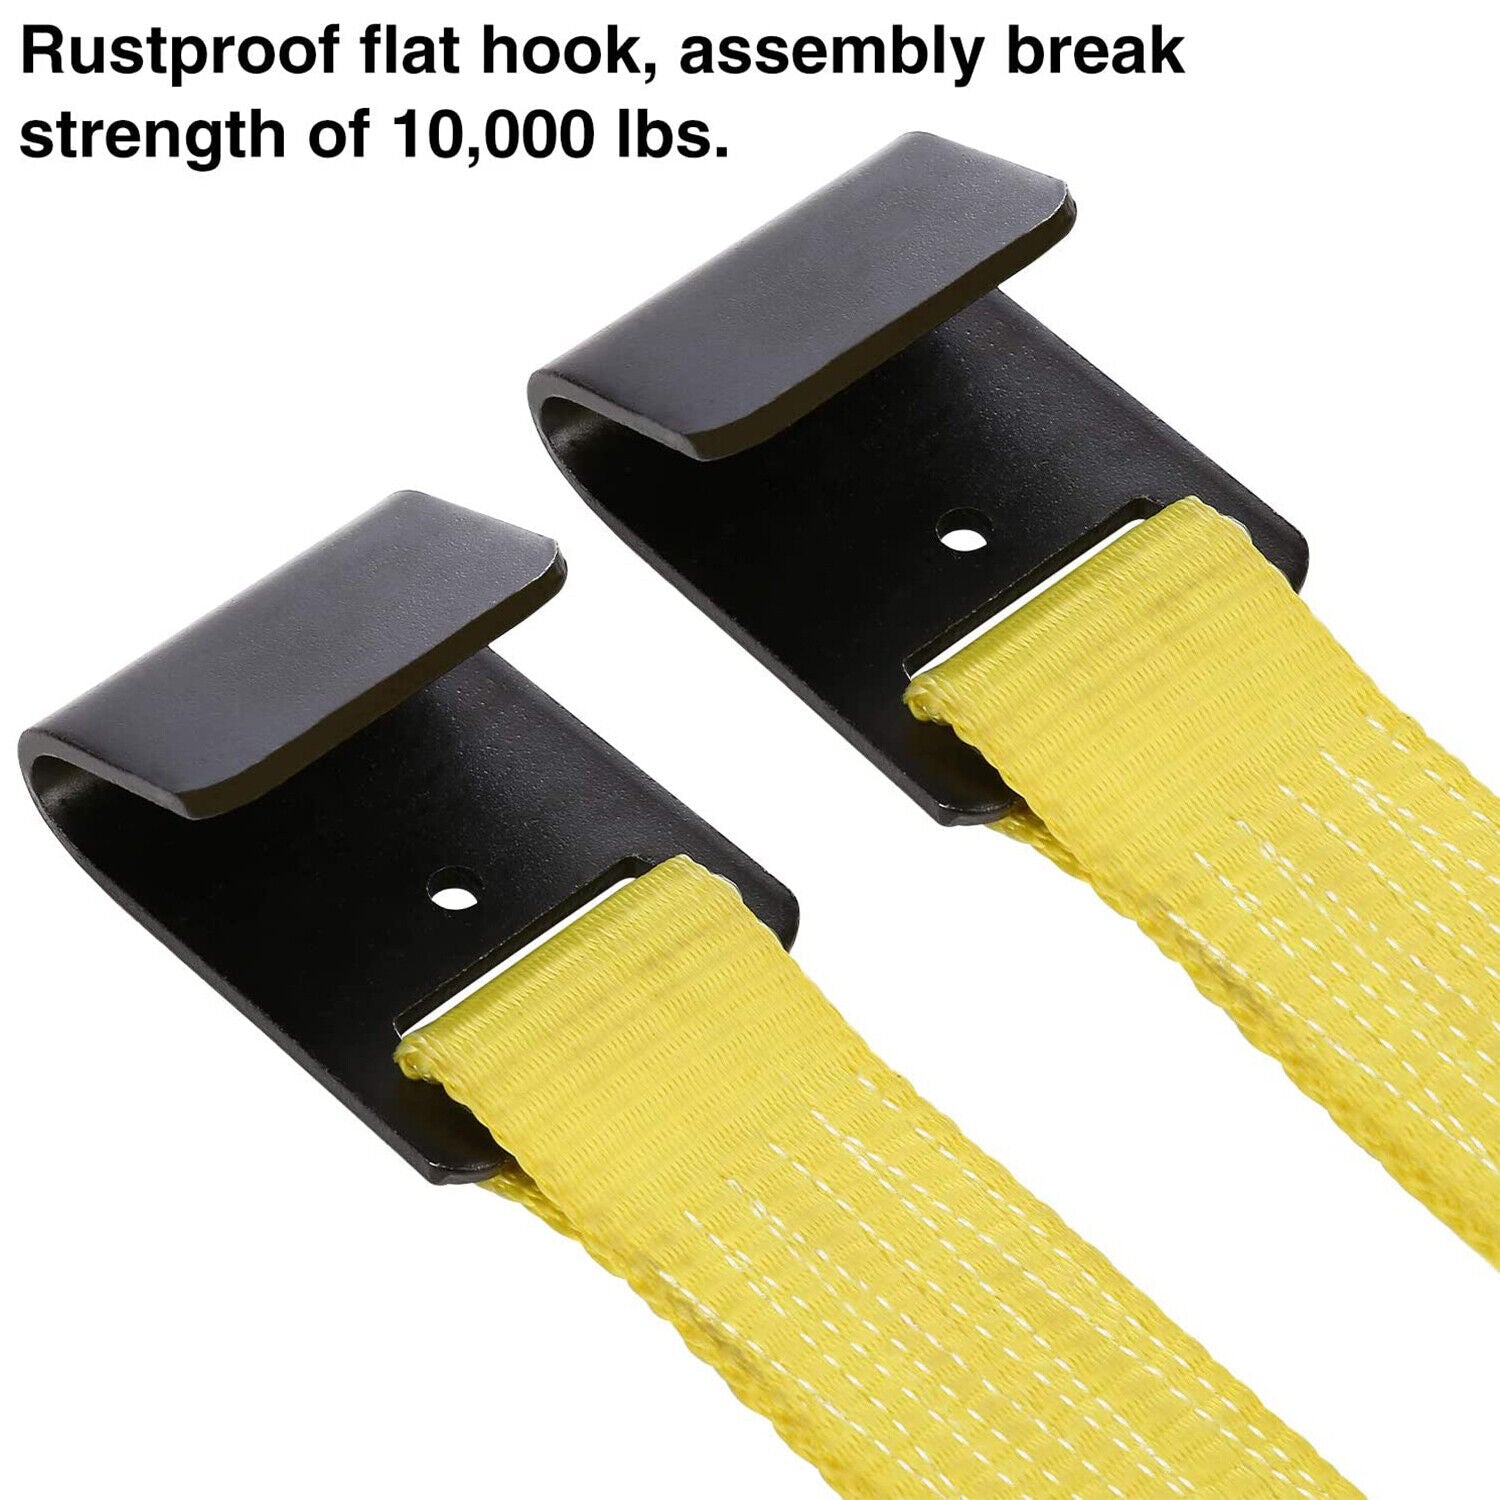 Autofonder Tow Dolly Basket Straps for 14-17 Tires (4 Packs)